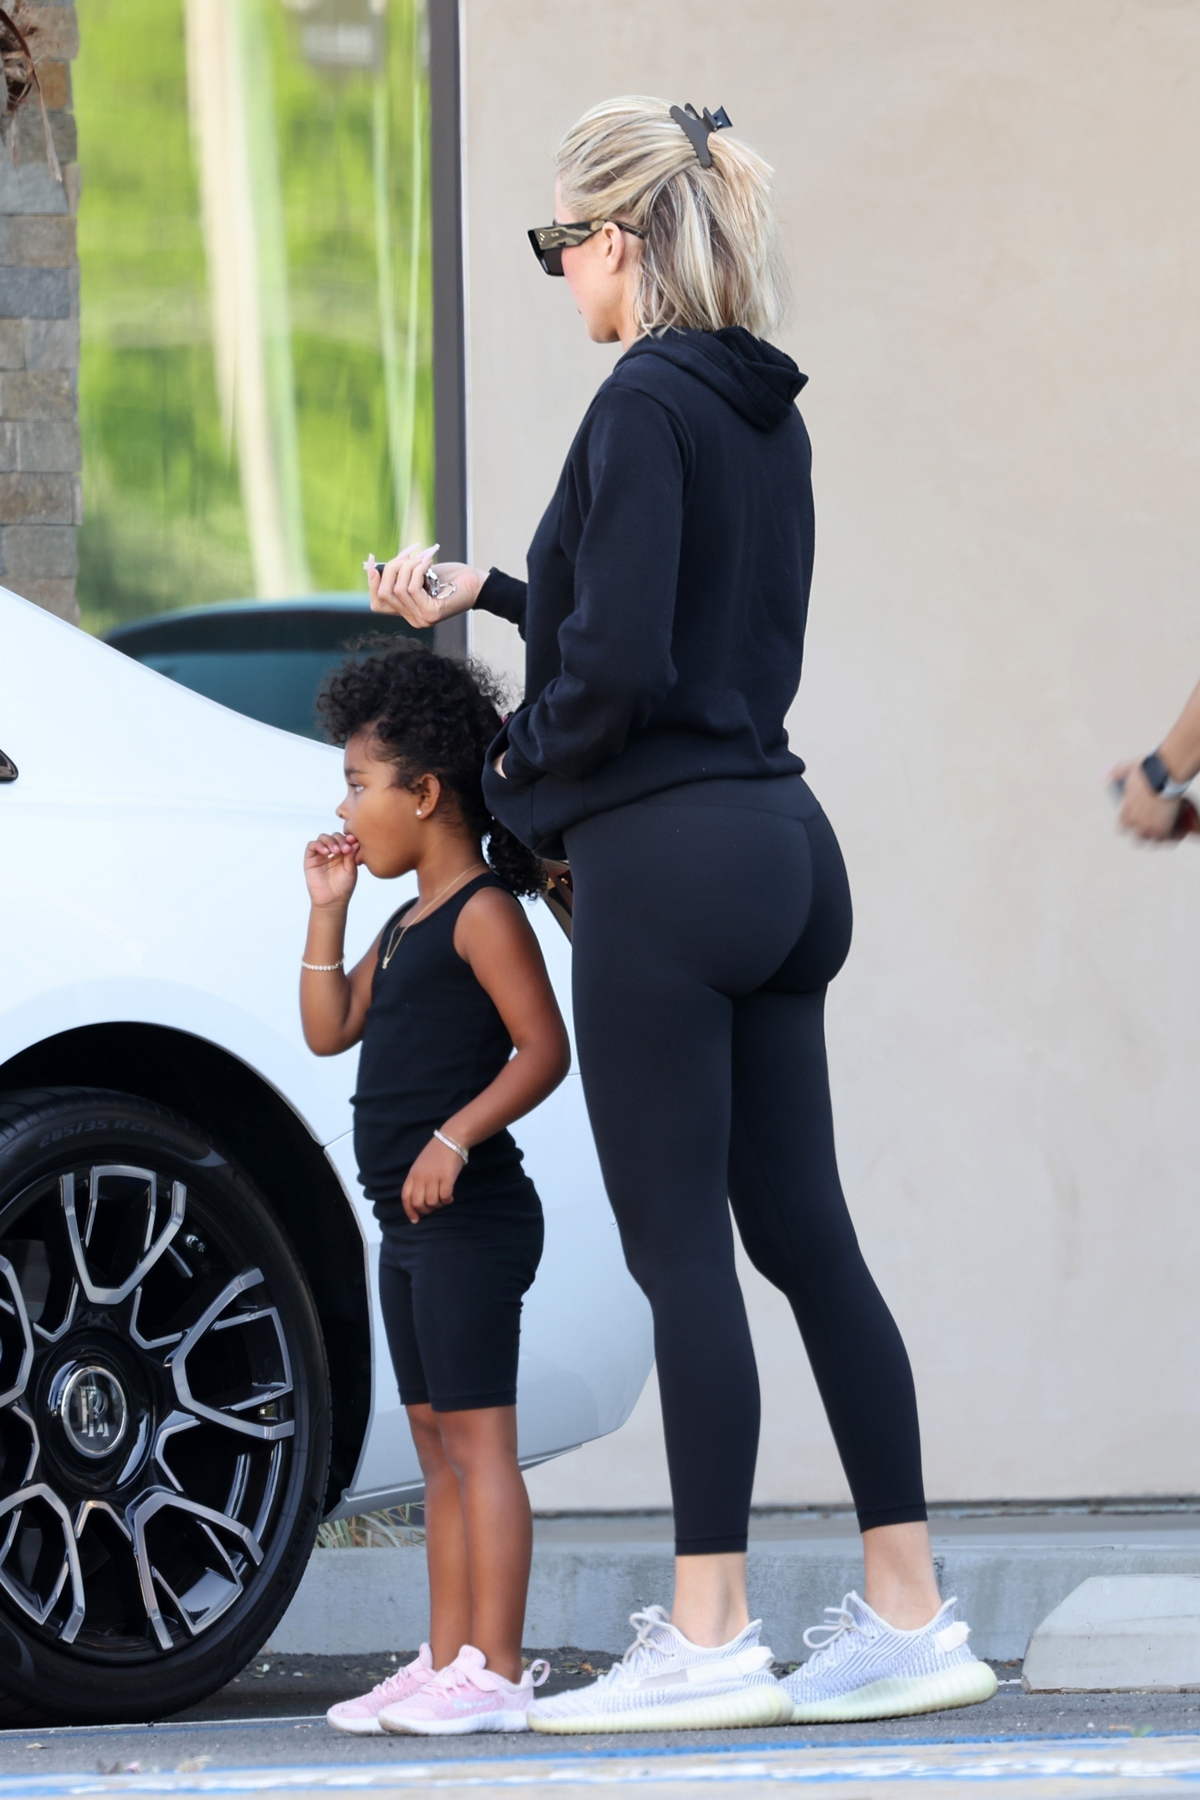 https://www.celebsfirst.com/wp-content/uploads/2022/05/khloe-kardashian-sports-a-black-hoodie-and-leggings-as-she-takes-daughter-to-gymnastics-class-in-los-angeles-040522_1.jpg